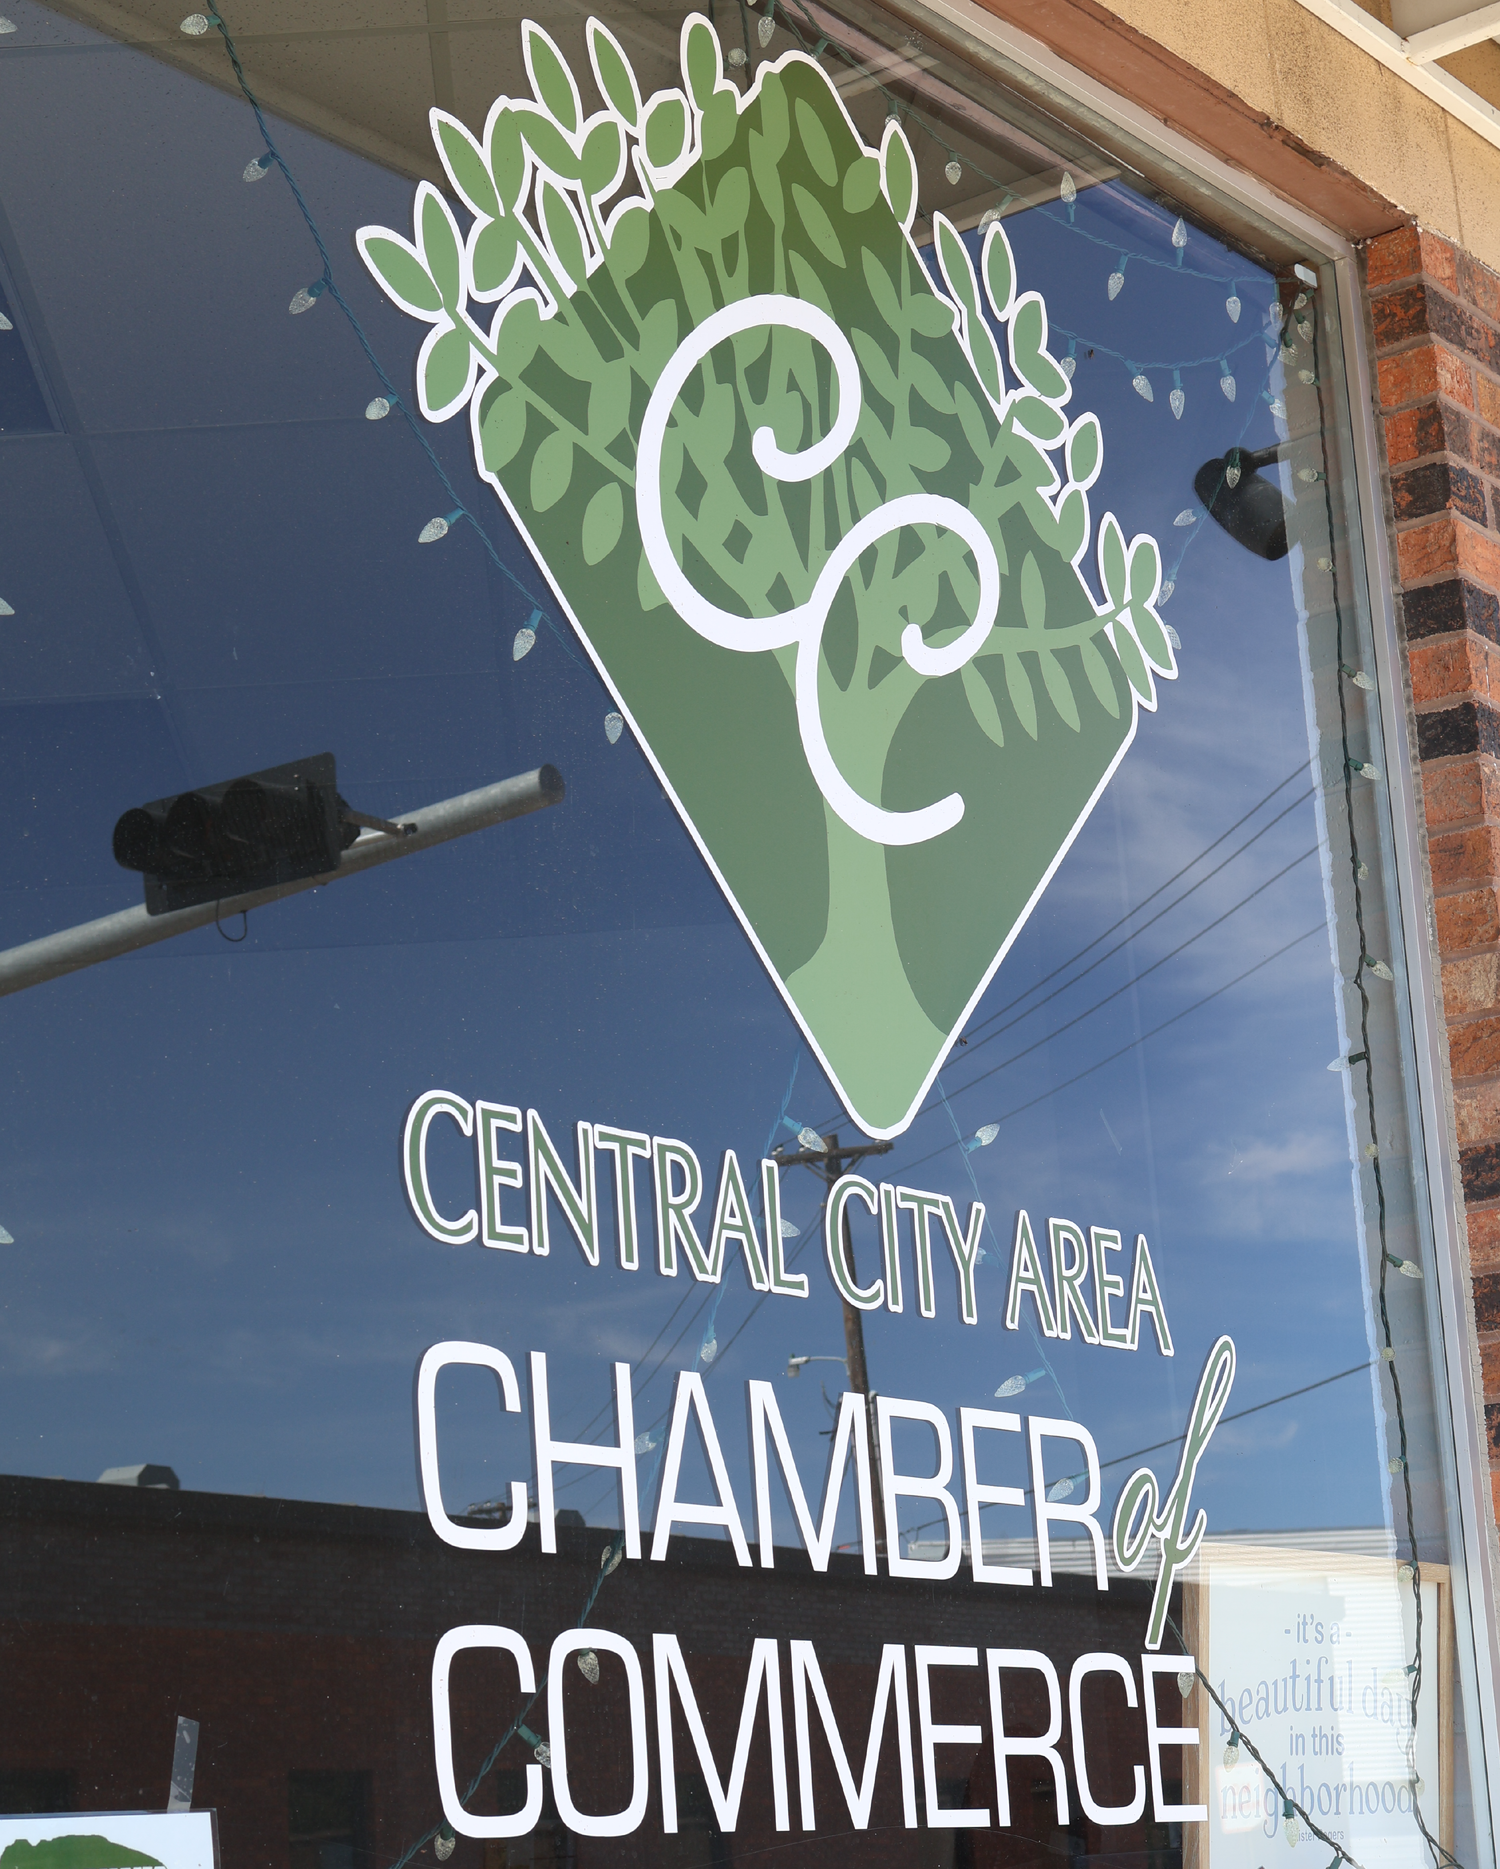 Glass window at the Central City Area Chamber of Commerce with their logo on it